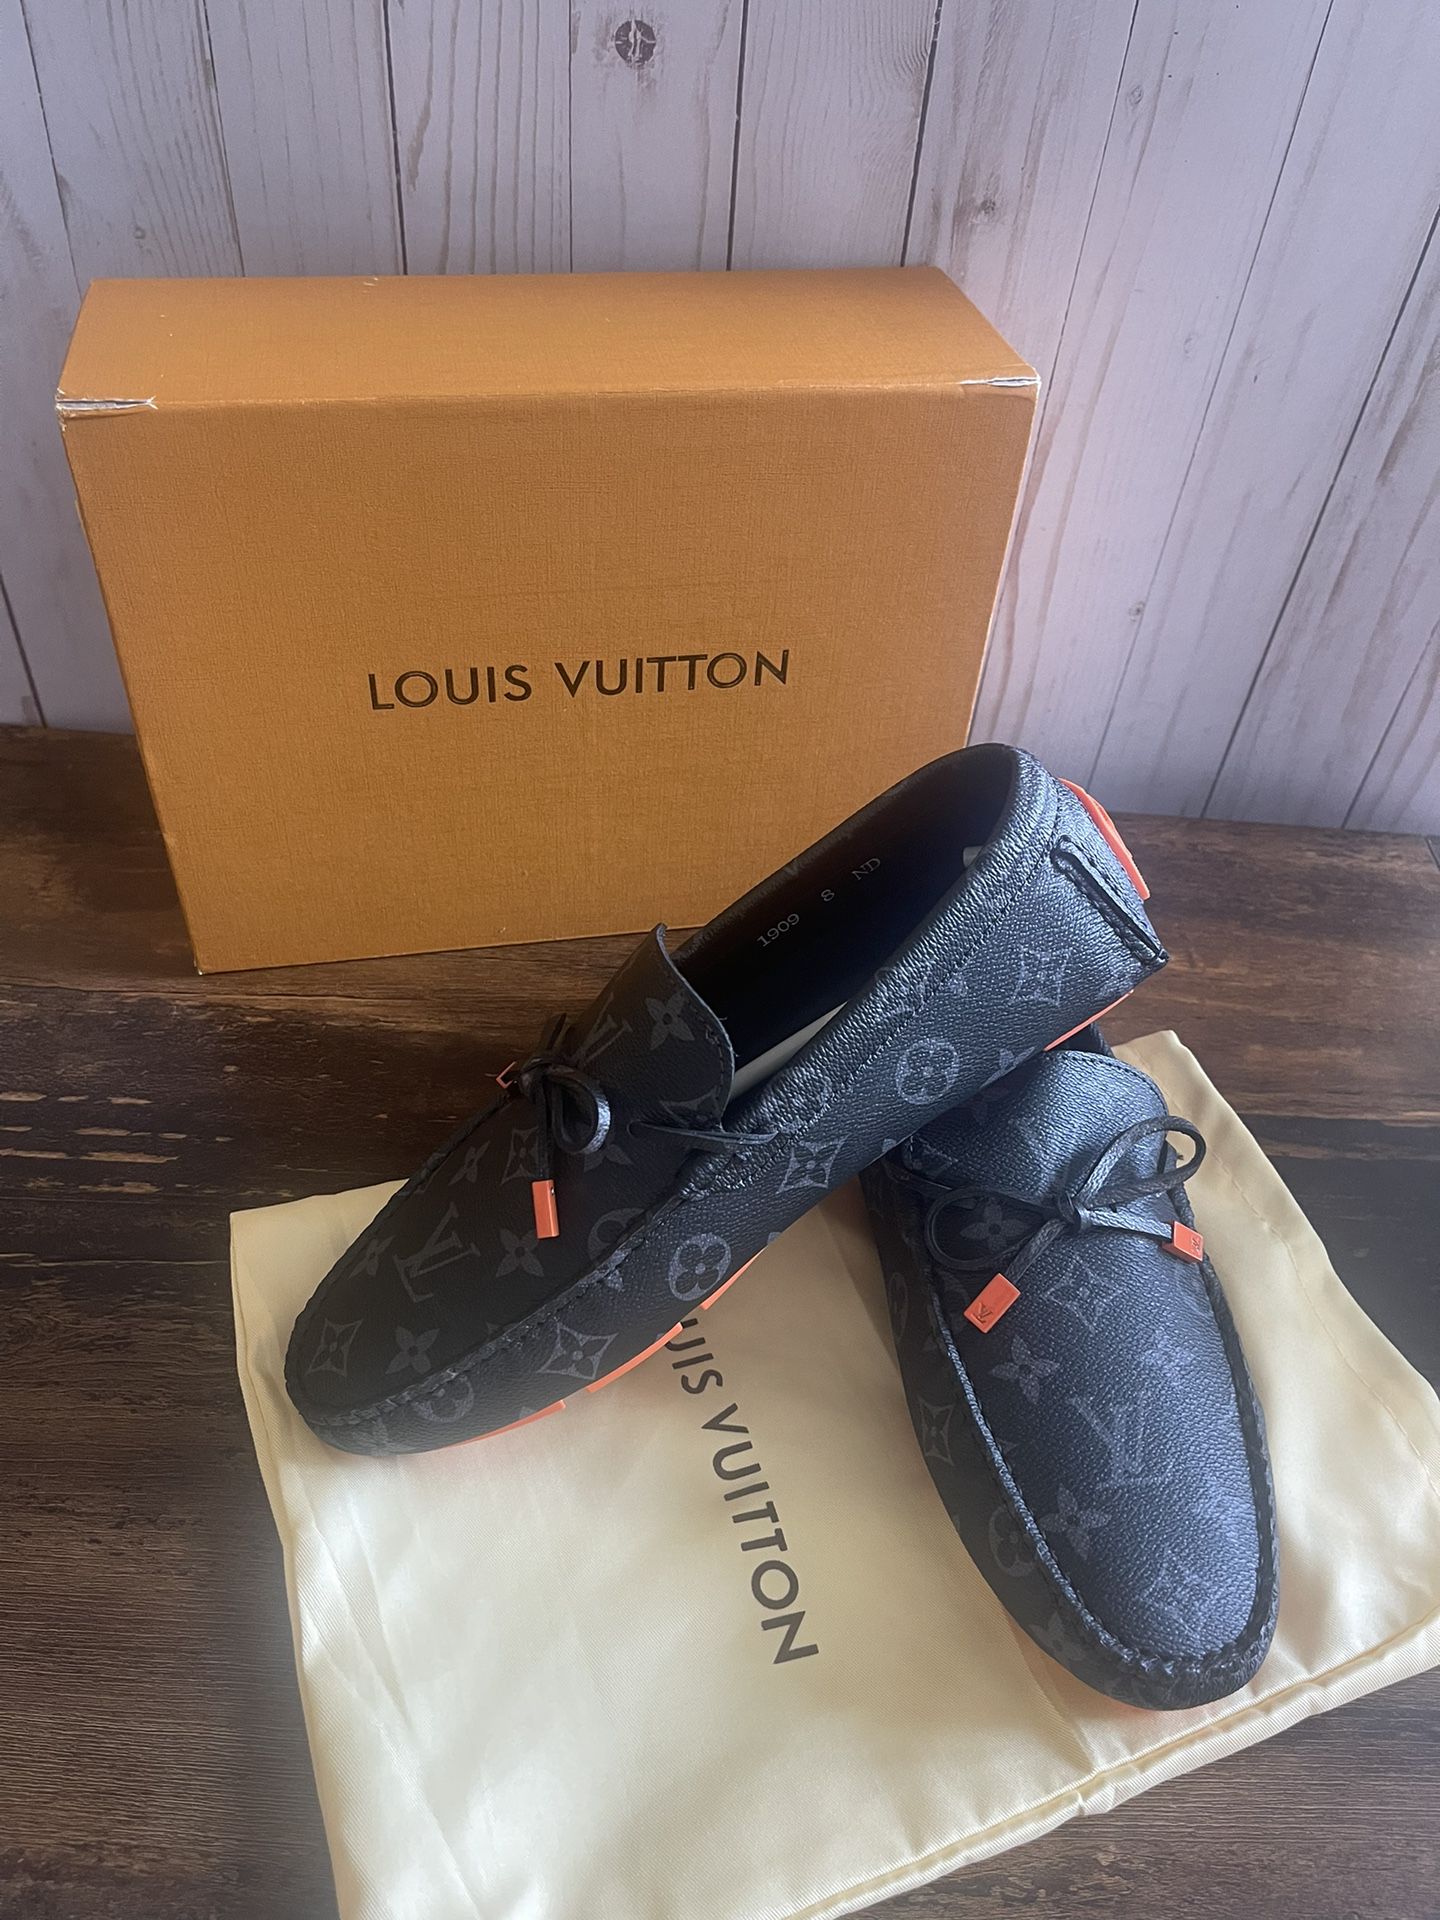 LOUIS VUITTON Arizona Moccasin Monogram Canvas Men's Shoes Loafers for Sale  in Glen Cove, NY - OfferUp